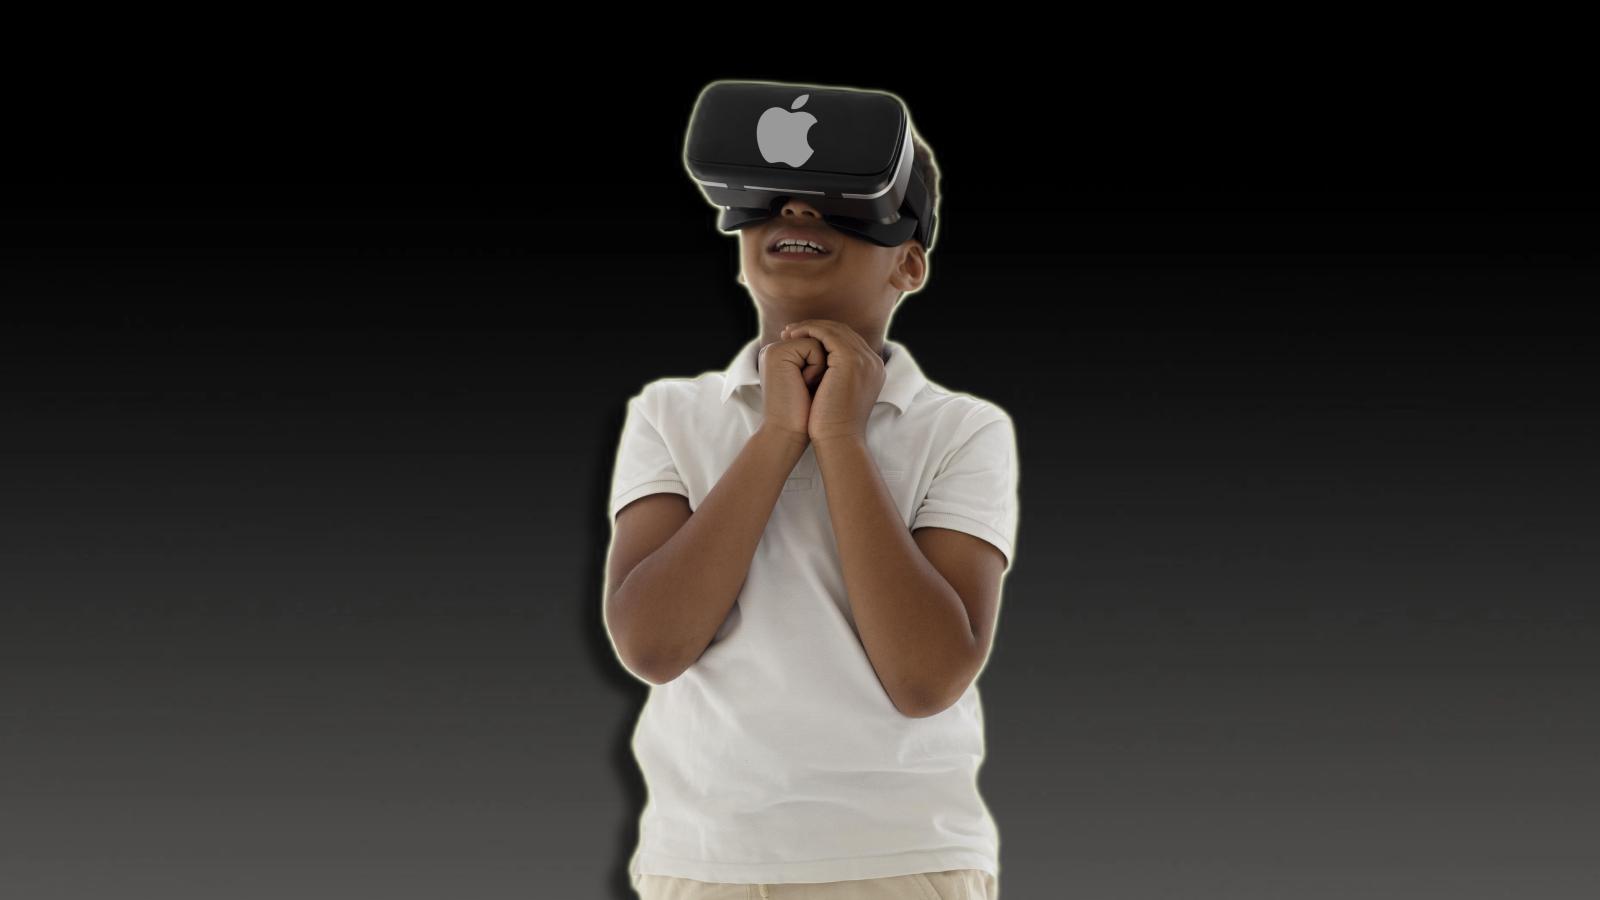 Someone wearing a VR headset with Apple's logo